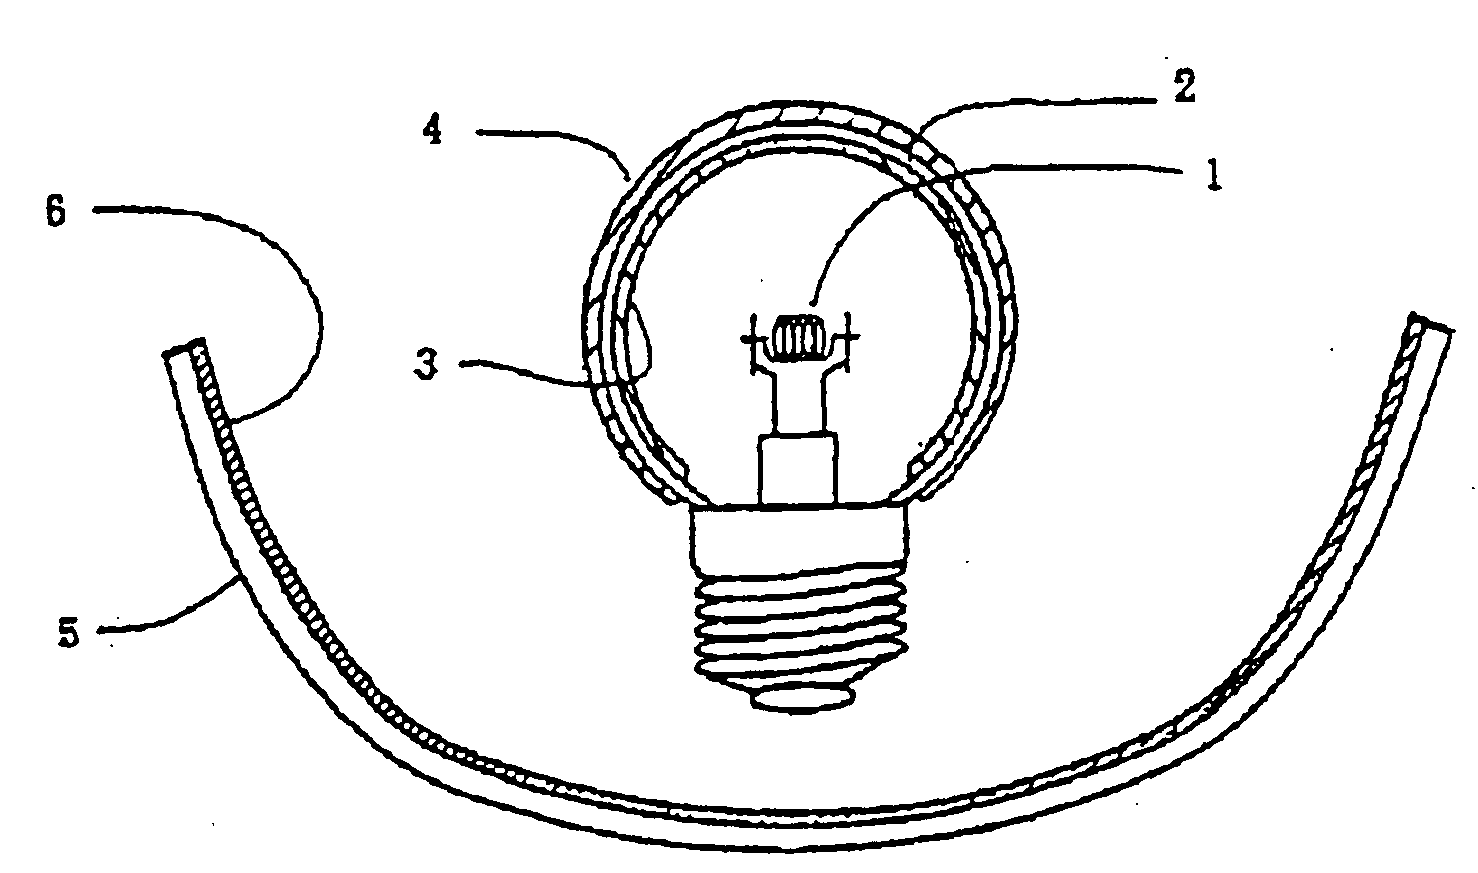 Fluorescent material and light-emitting device